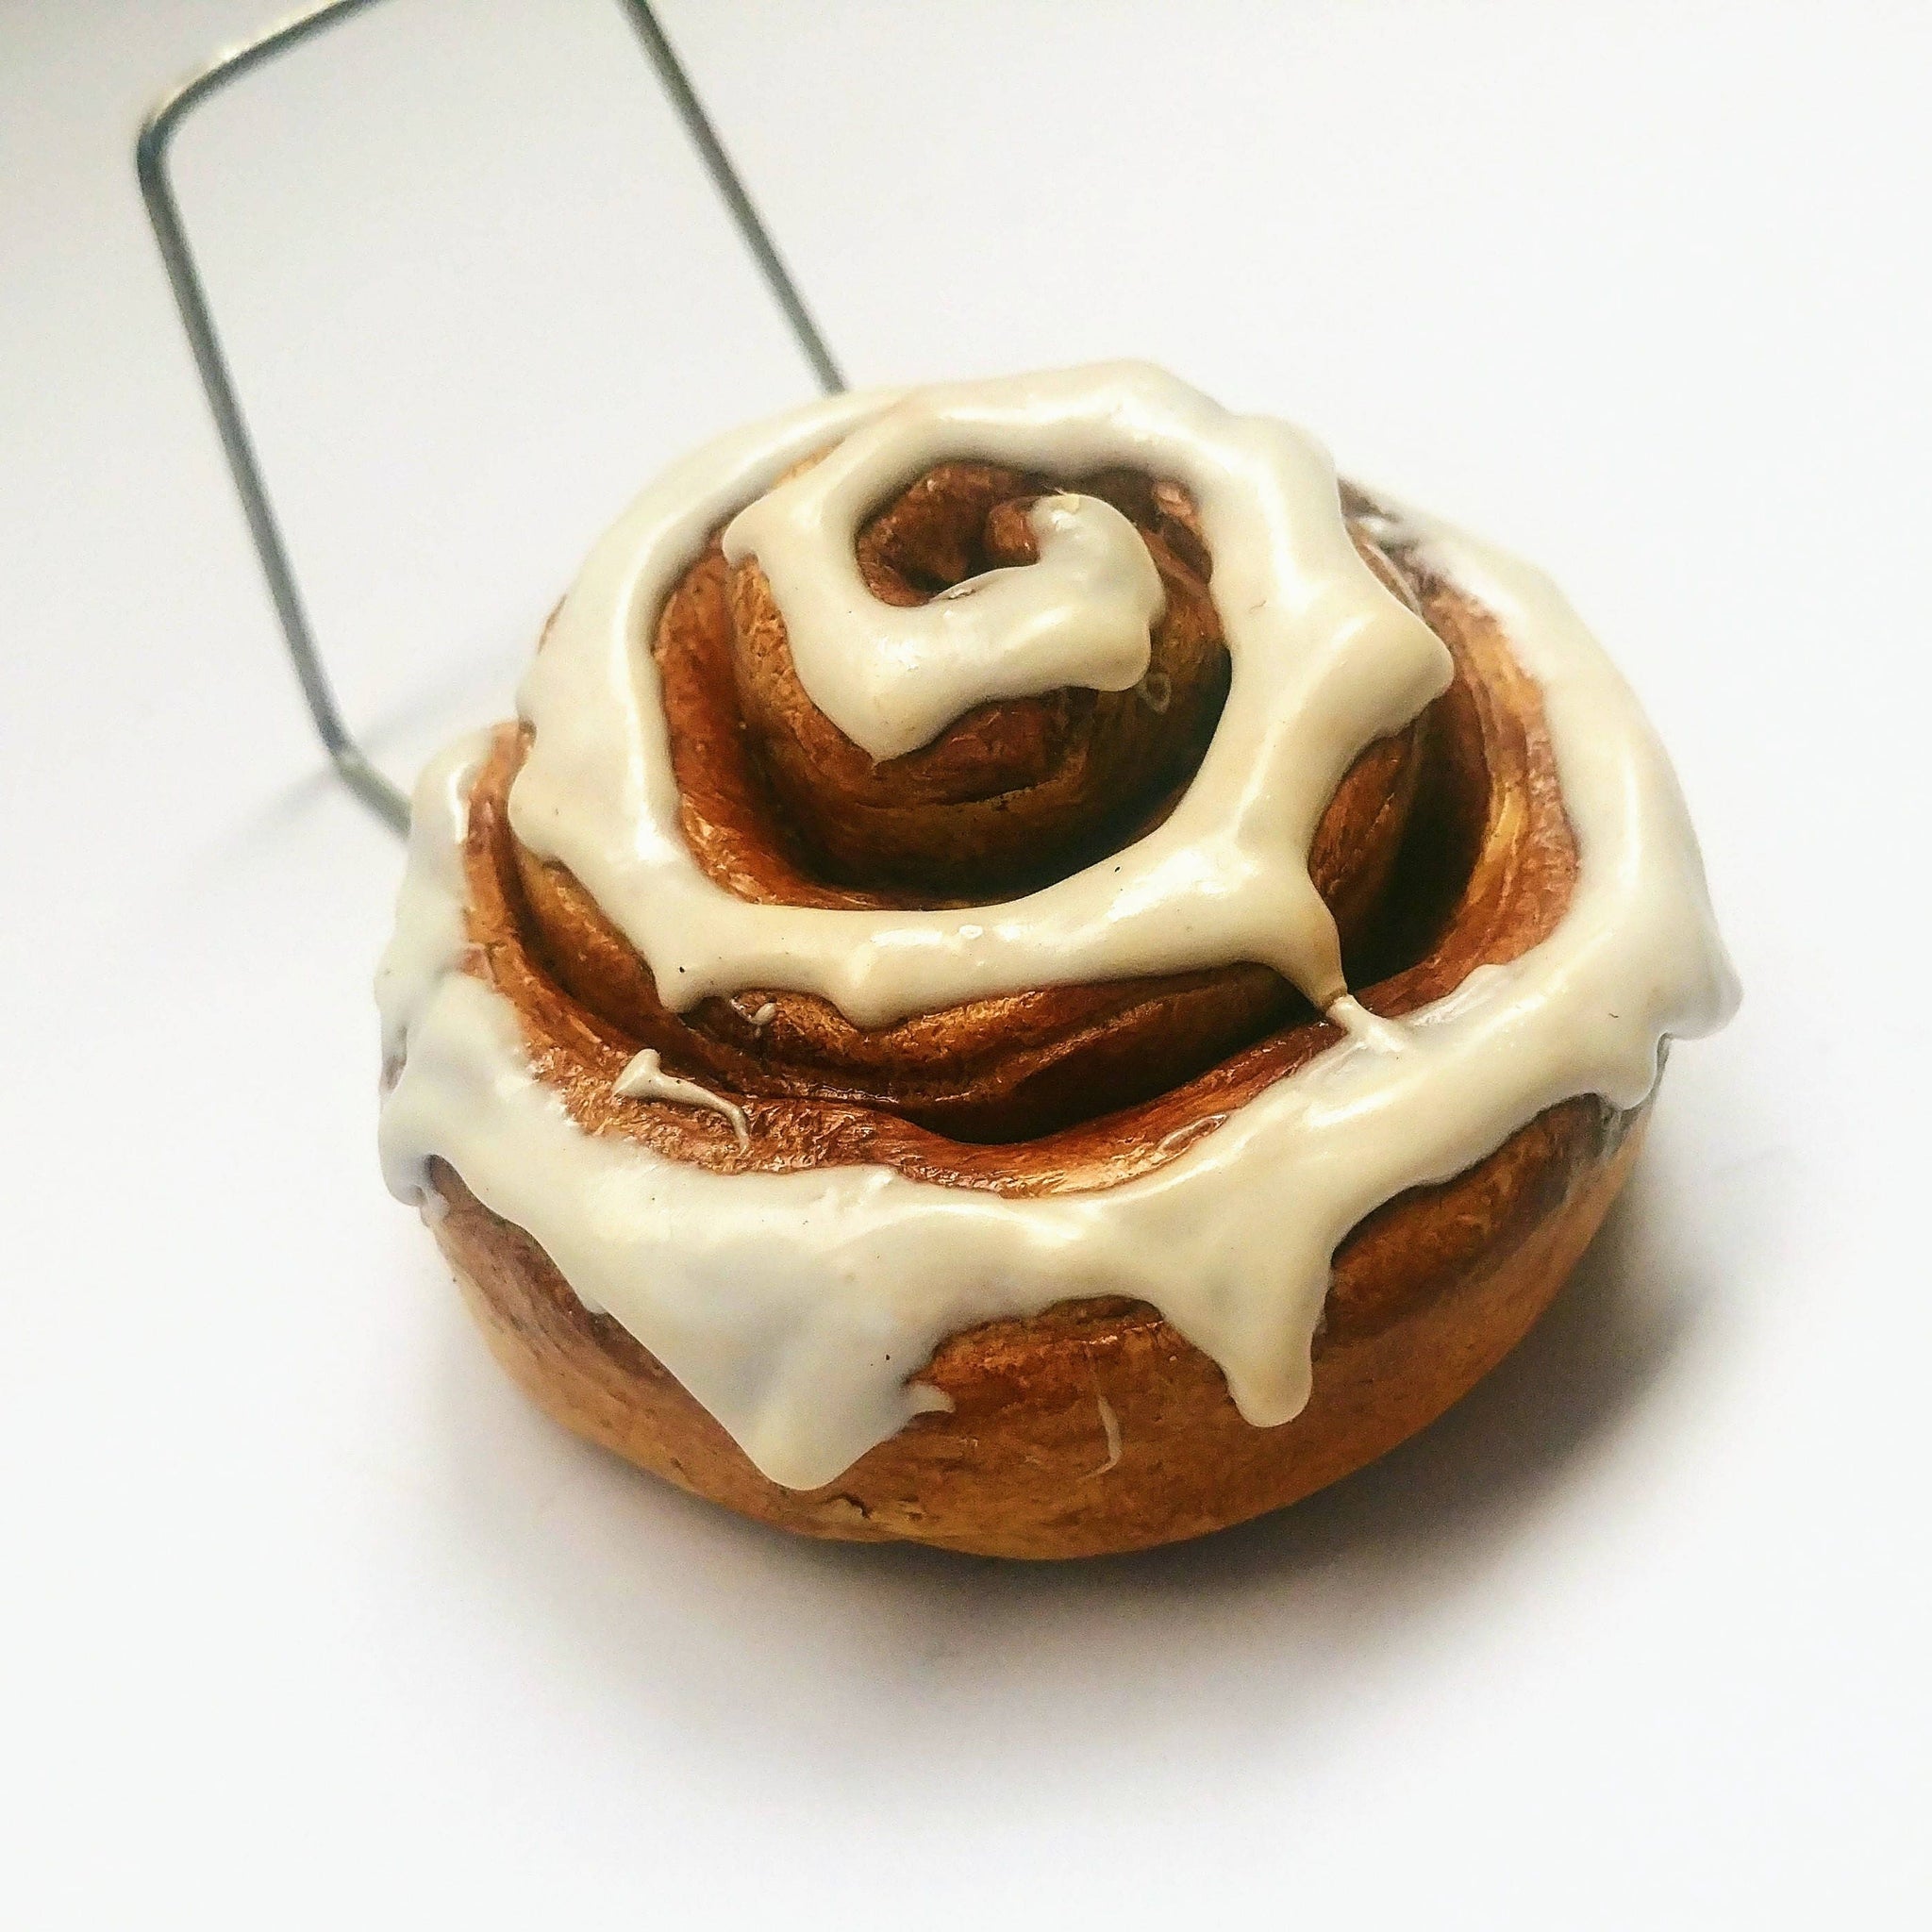 Cinnamon Roll Business Card Holder For Desk Pastry Business Card